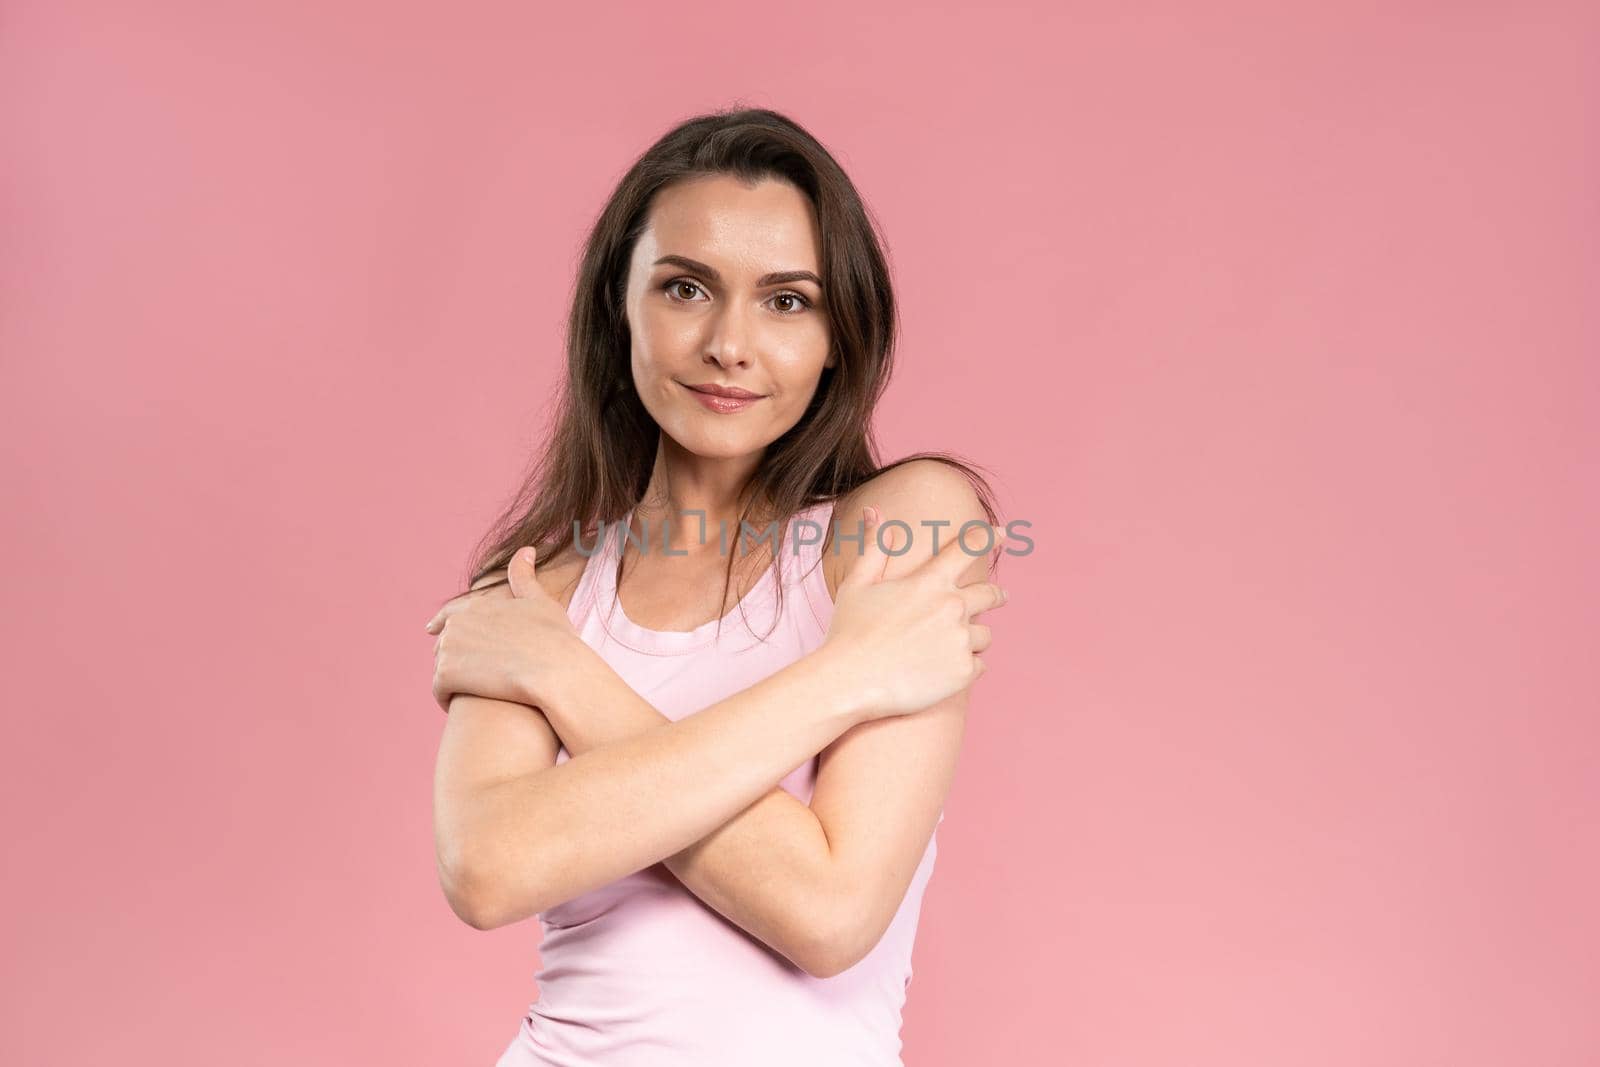 Beautiful young woman with no makeup standing with hands crossed on her chest, attractive brunette girl on pink background. Human emotions, facial expression concept.